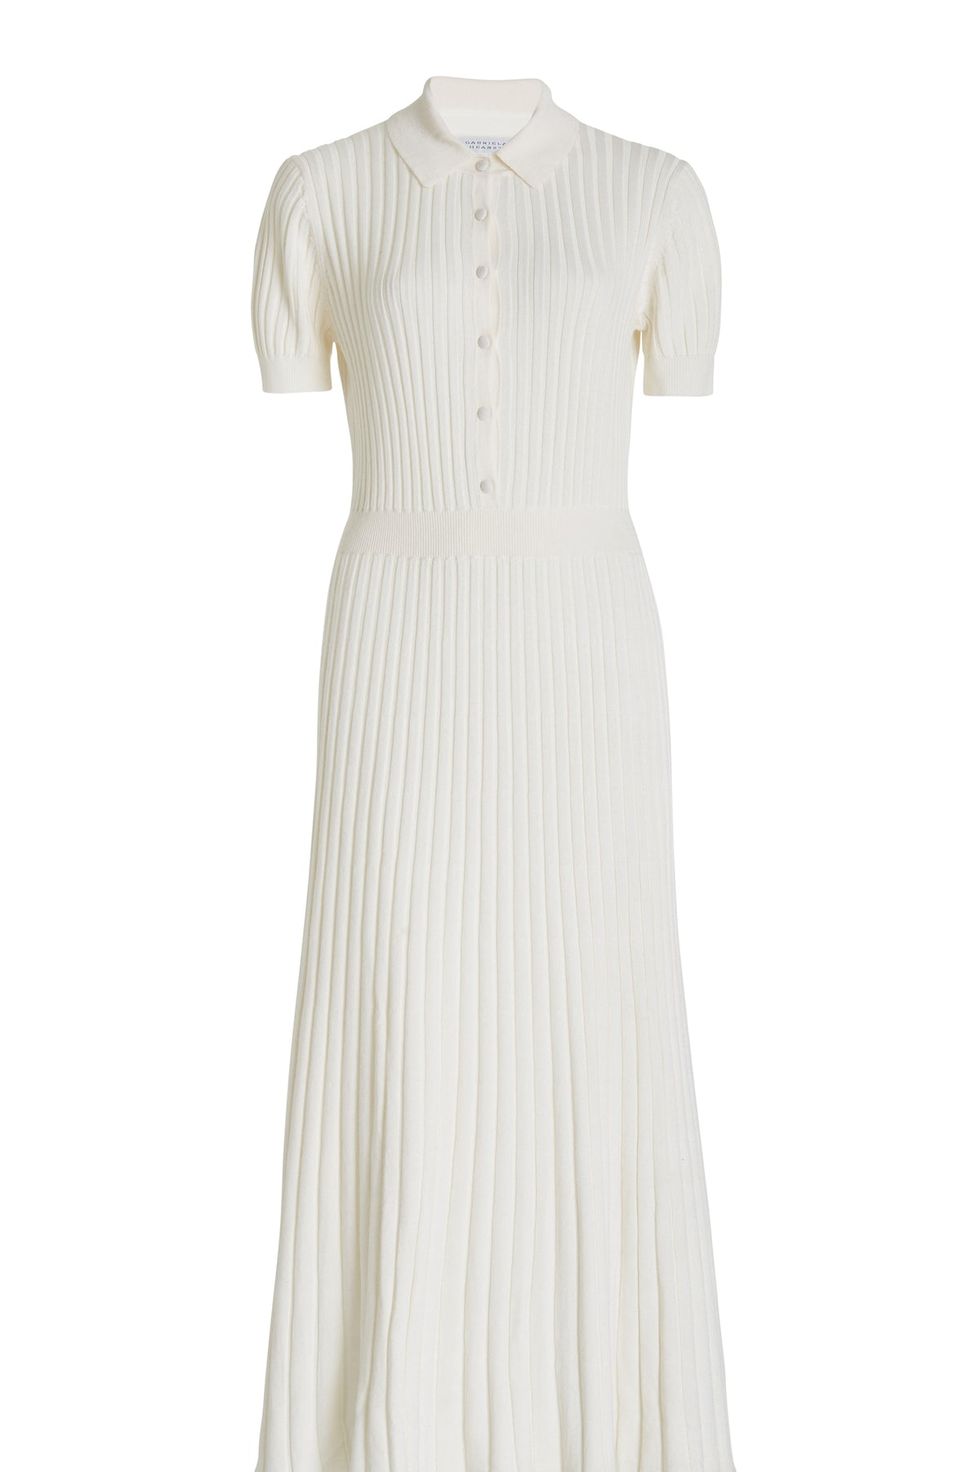 Amor Knit Dress in Ivory Cashmere Silk